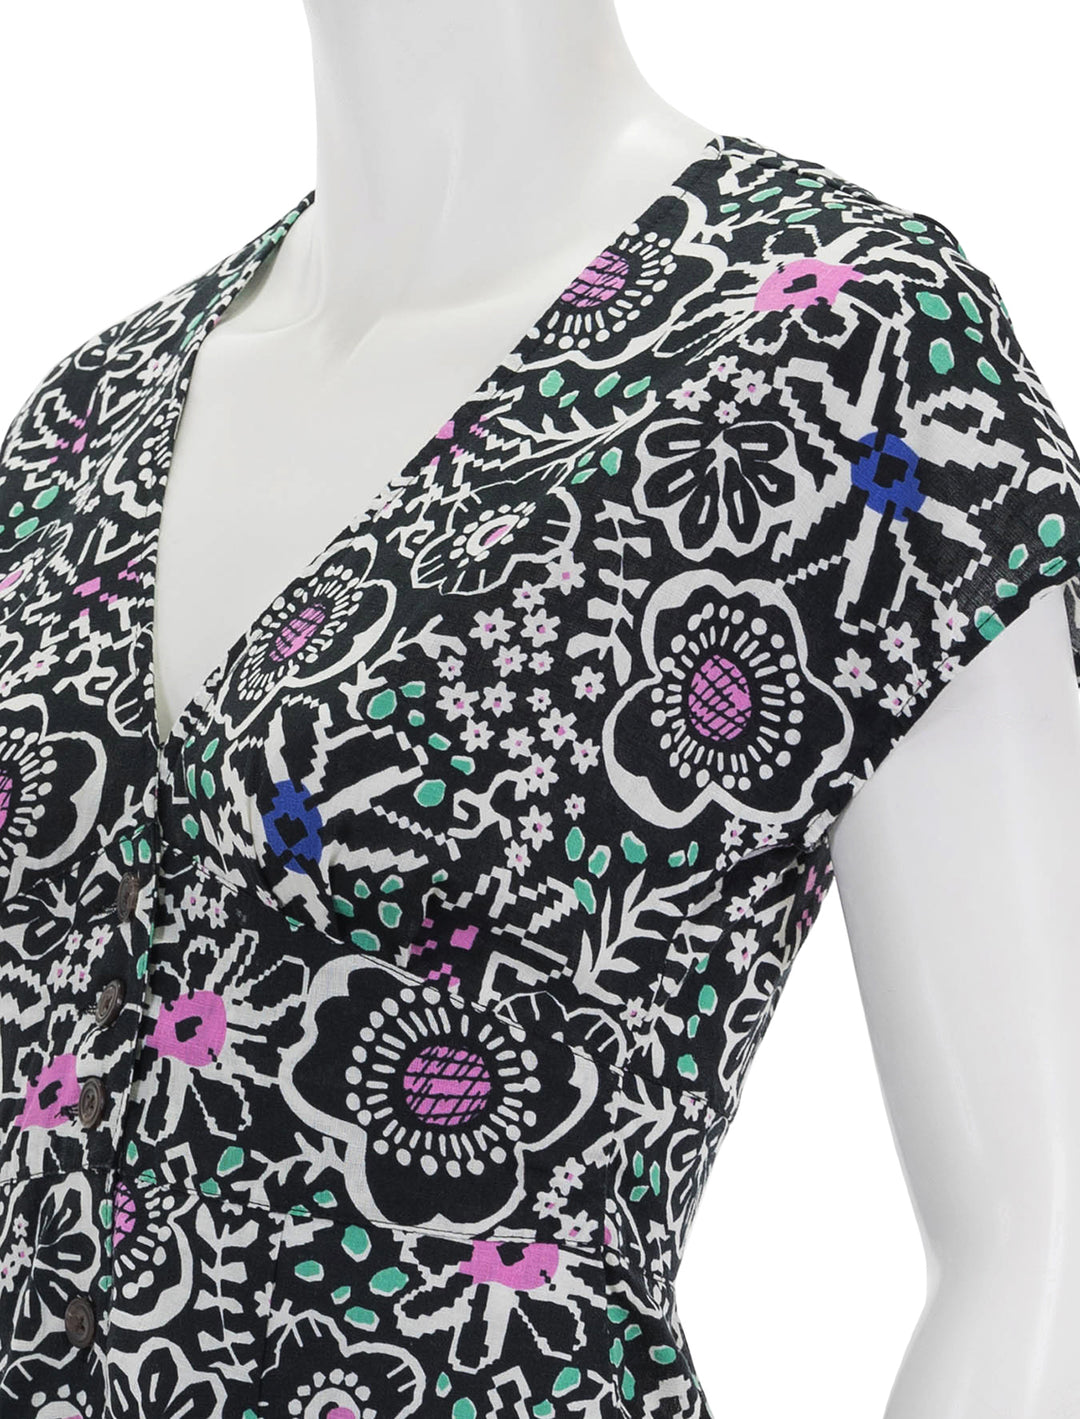 Close-up view of Marine Layer's camila mini dress in floral block print.